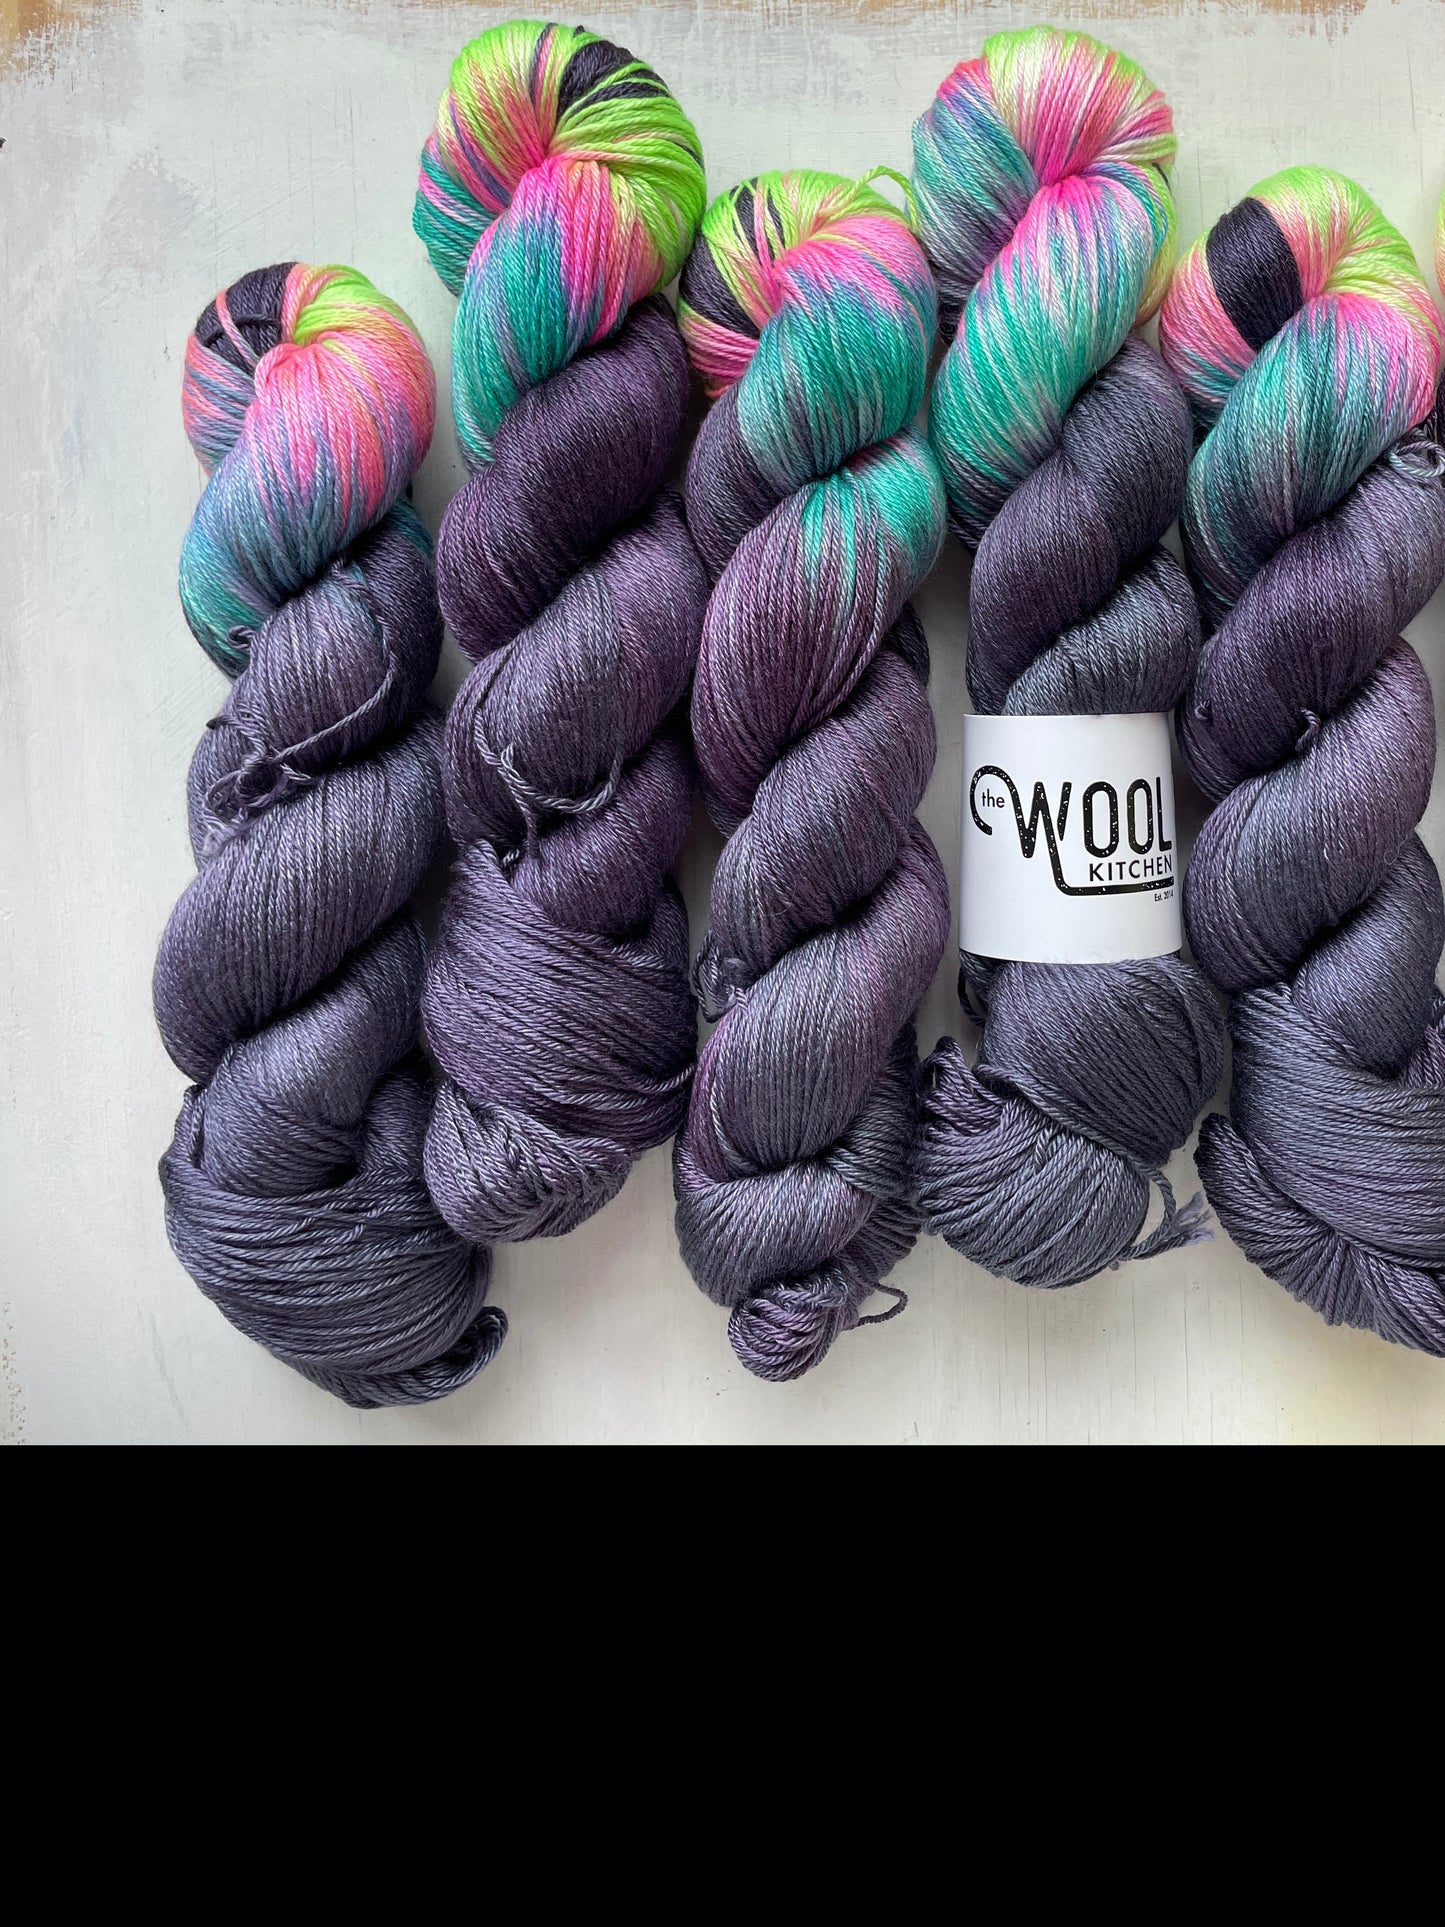 m2-9 Luxury 4ply Merino silk from the hand dyed yarn expert, The Wool Kitchen